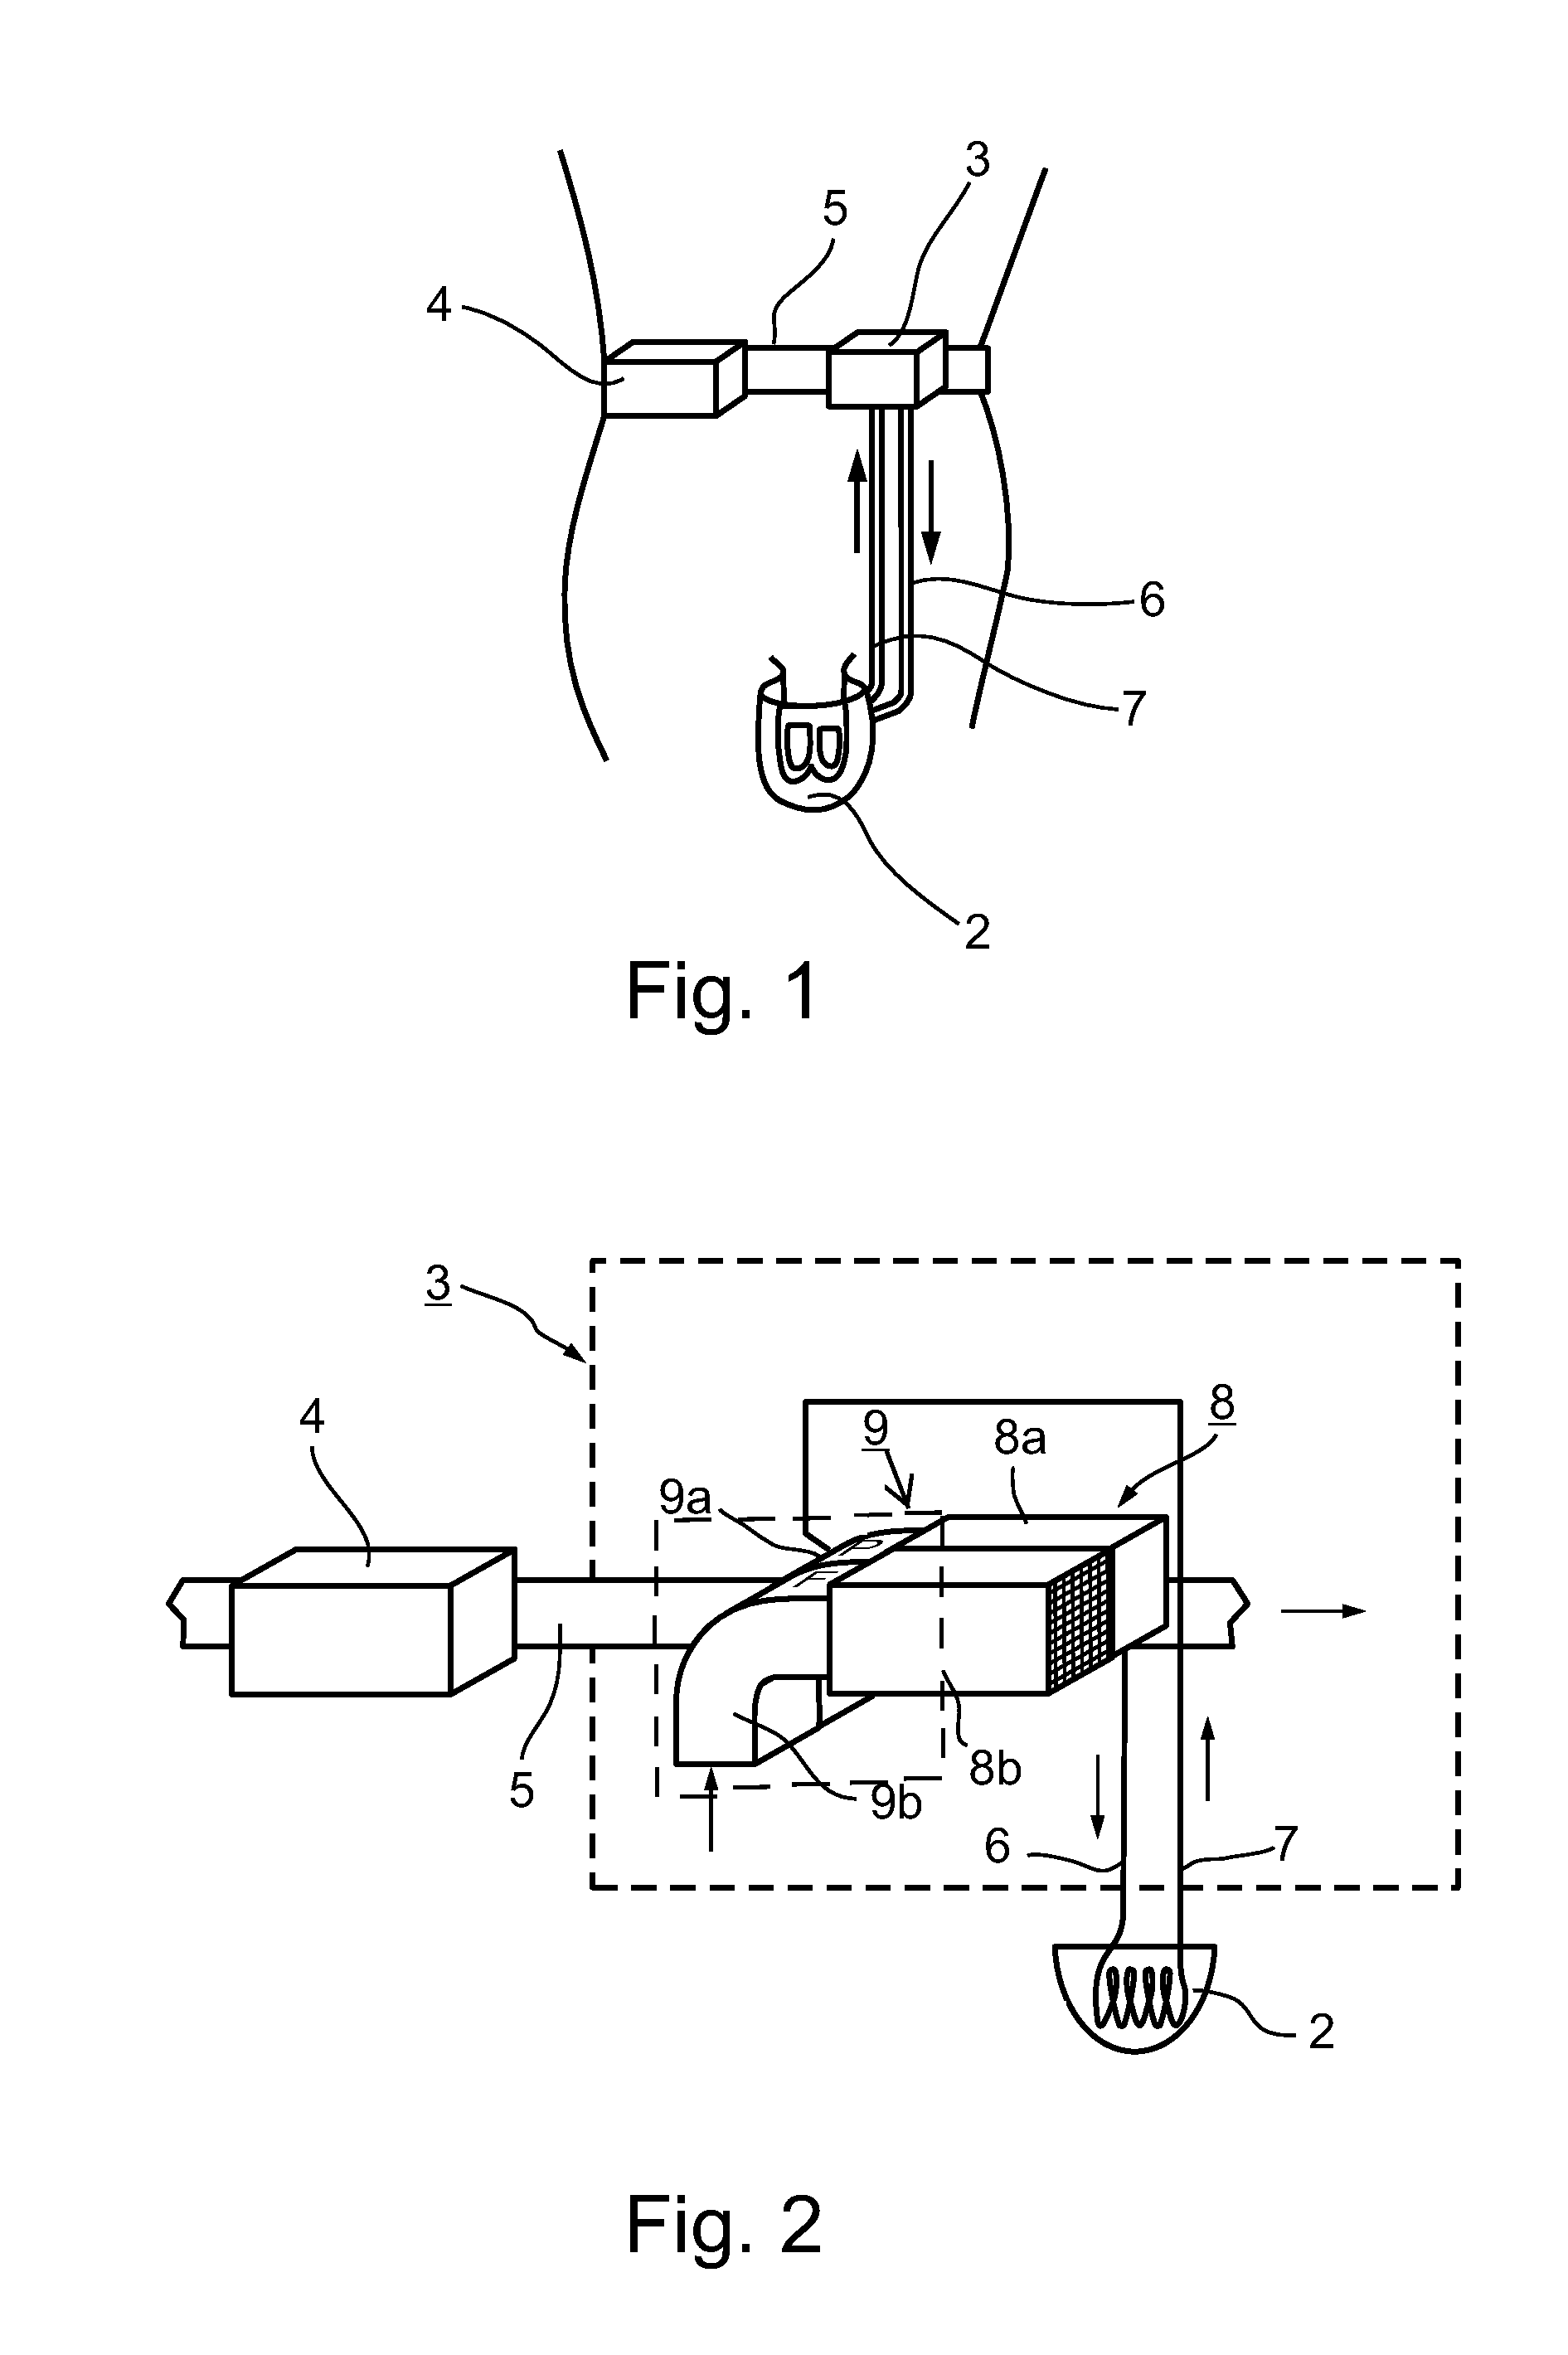 Cooling apparatus and method for reducing risk of male infertility in heated environments